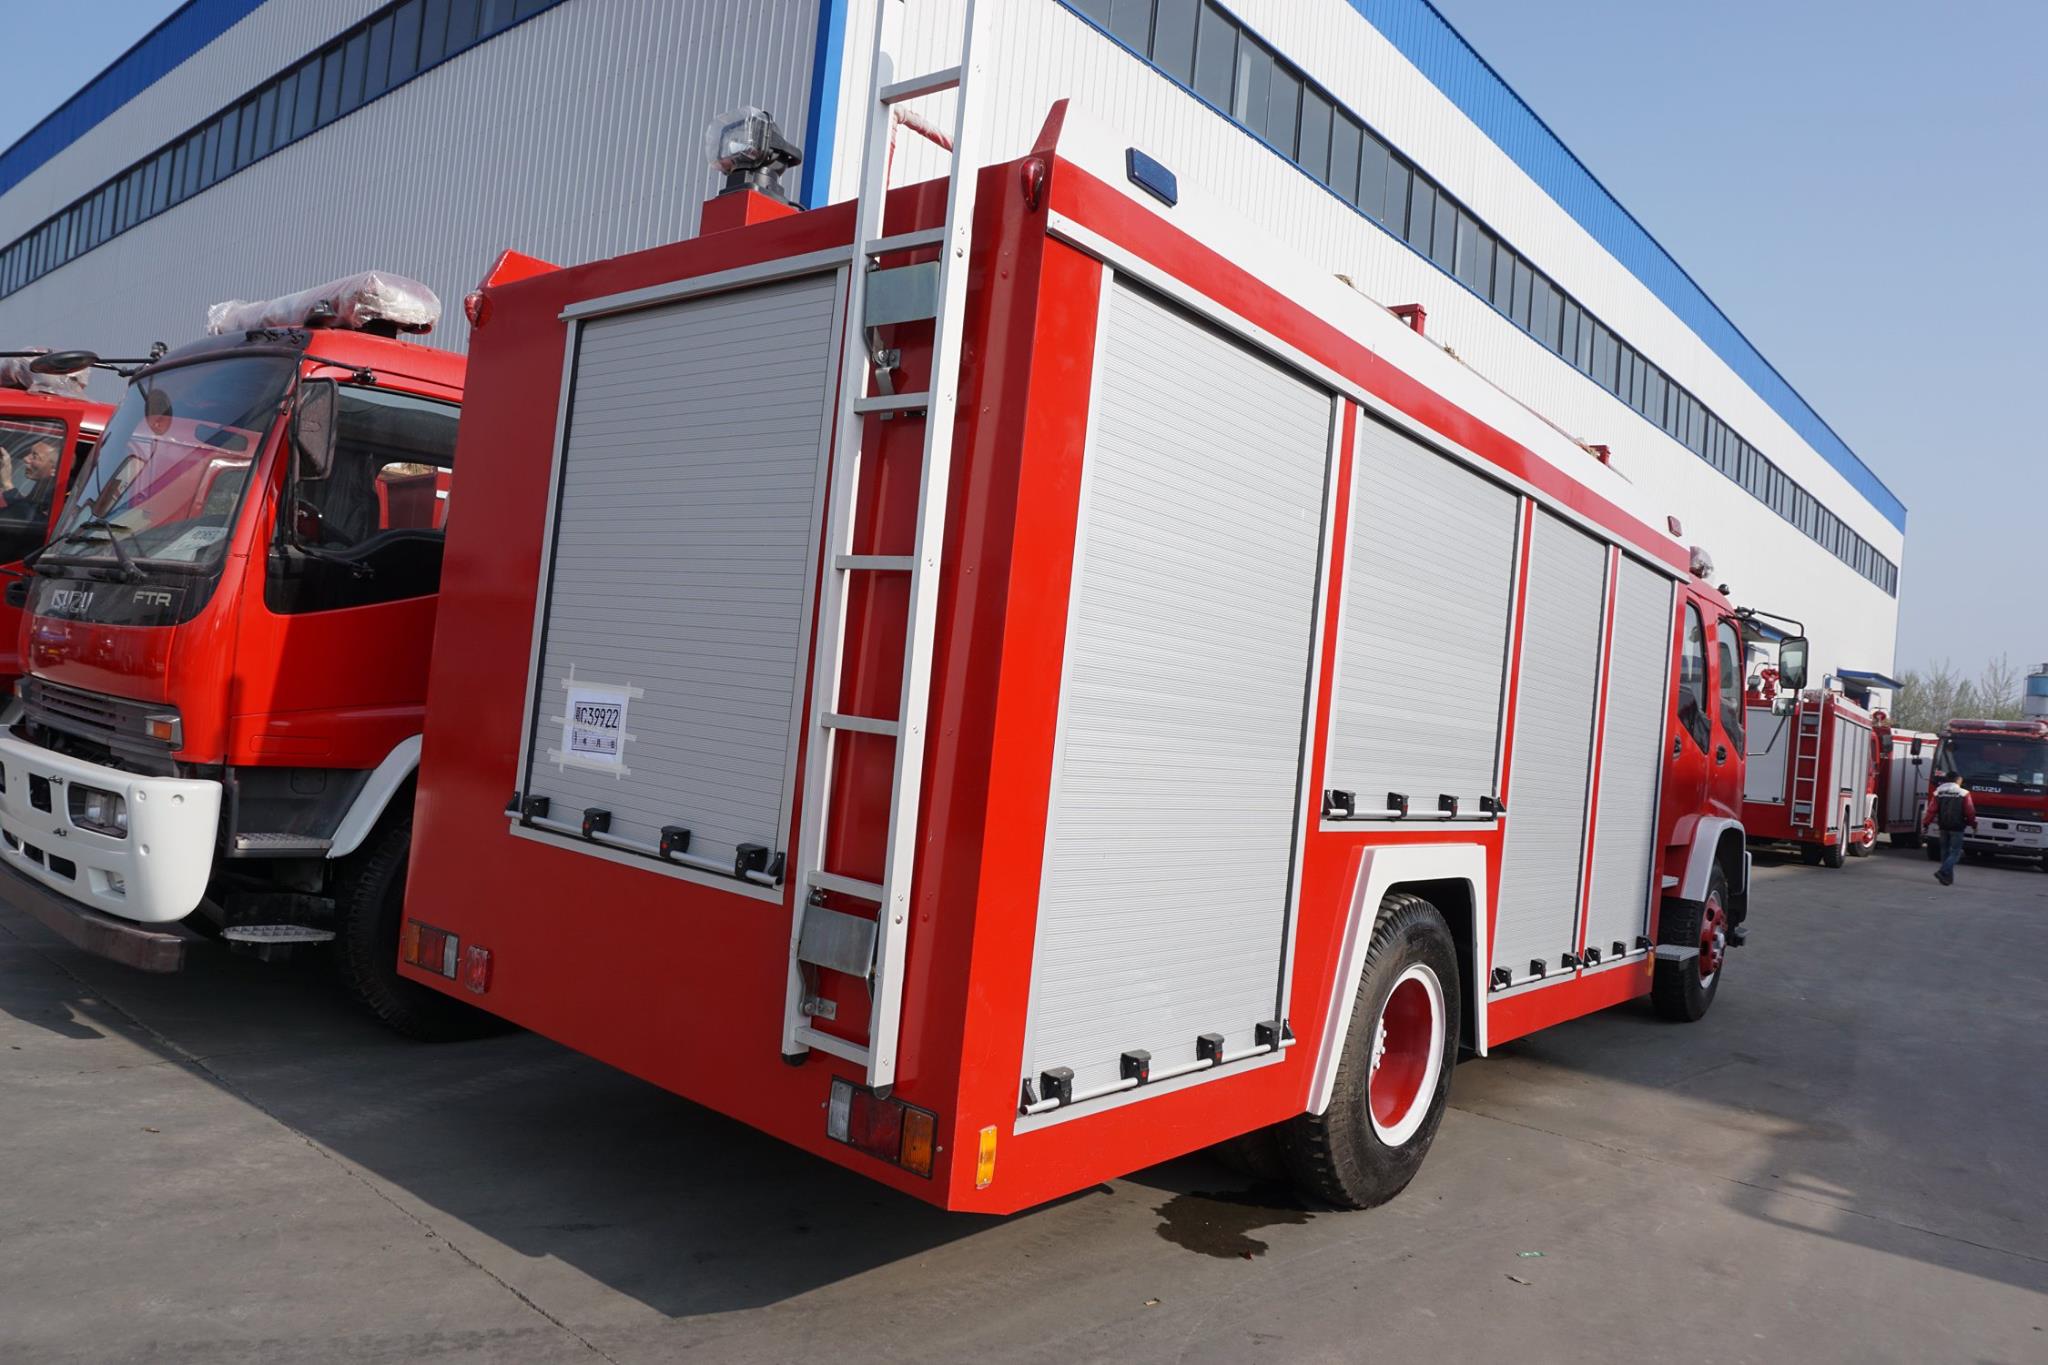 Japan Brand New Condition 6000liters Water Tank Fire Truck 